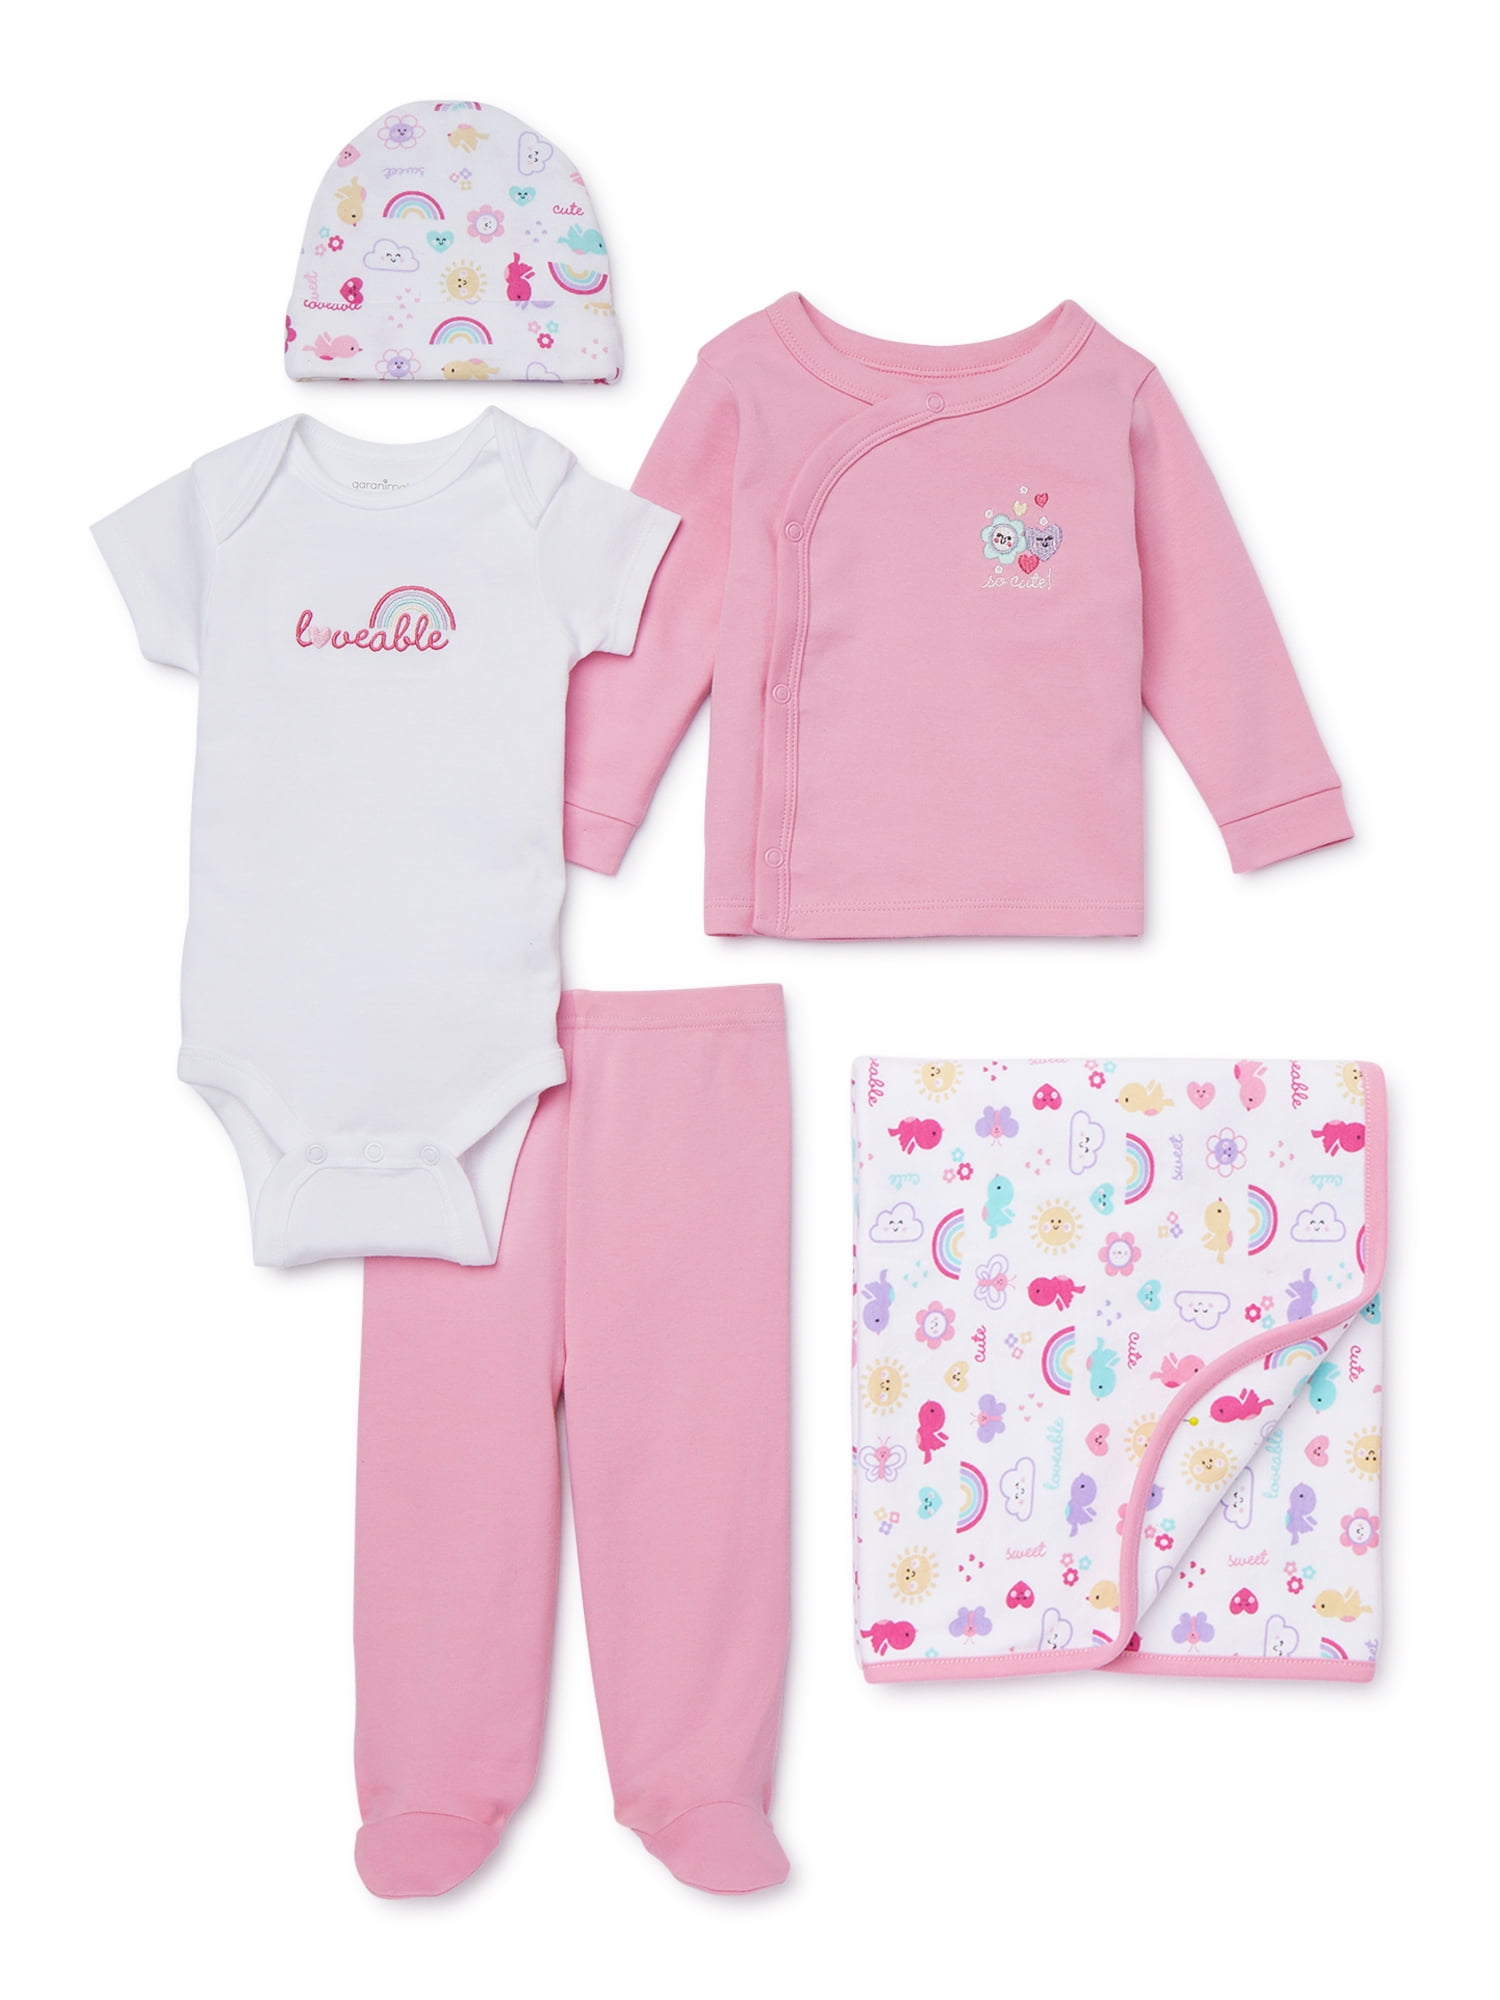 Fashion Heart Pants 6-9 Month Outfit Star Love one piece Garanimals Girls  Infant 3-6 CI3993758